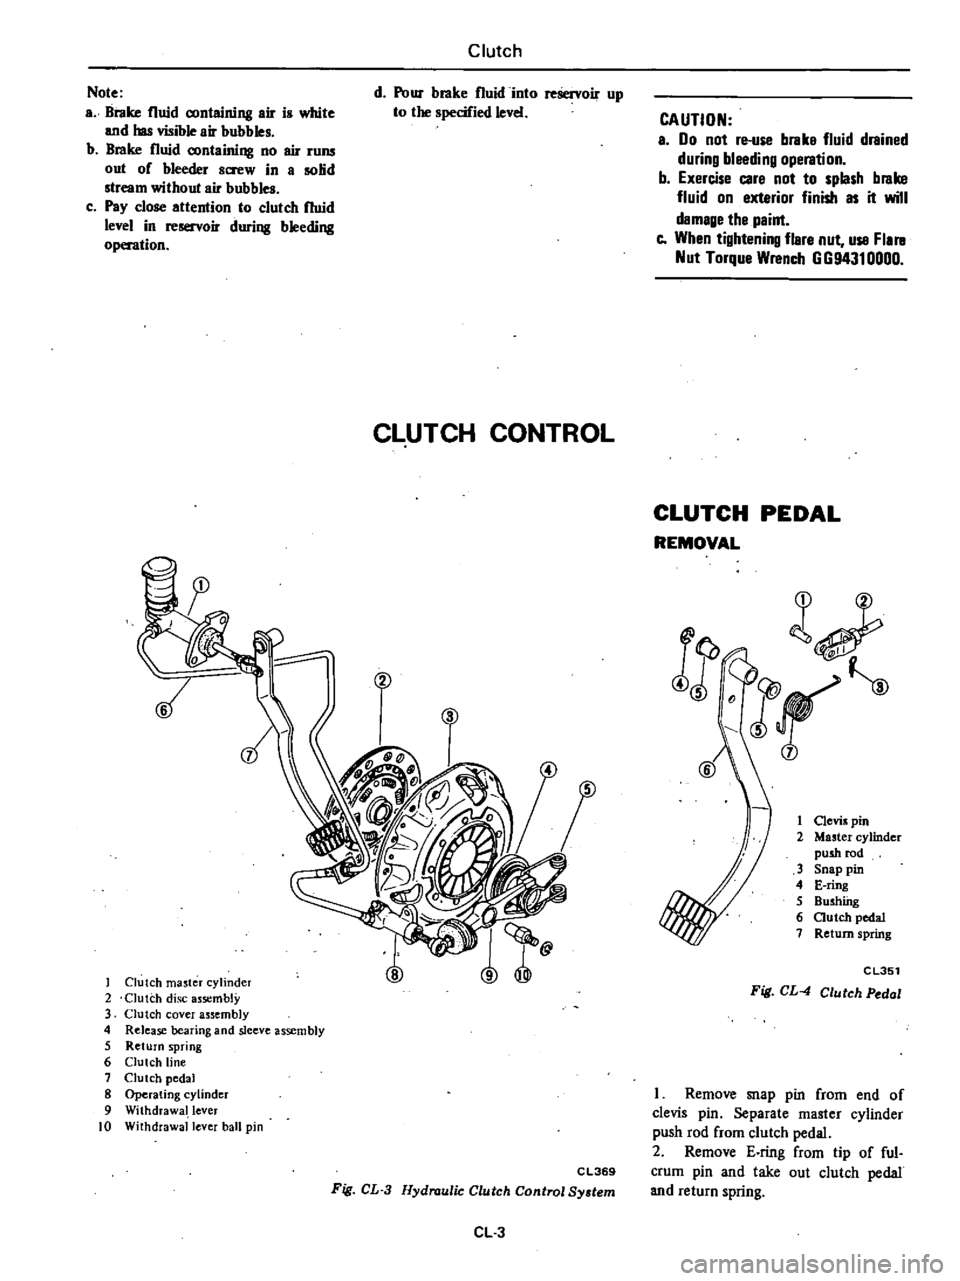 DATSUN 210 1979  Service Manual 
Note

a 
Brake 
fluid

conlaining 
air 
is

white

and 
has

visible 
air 
bubbles

b

Brake 
fluid

containing 
no 
air

runs

out

of 
bleeder 
screw 
in 
a 
1lO6d

stream 
without 
air

bubbles

c